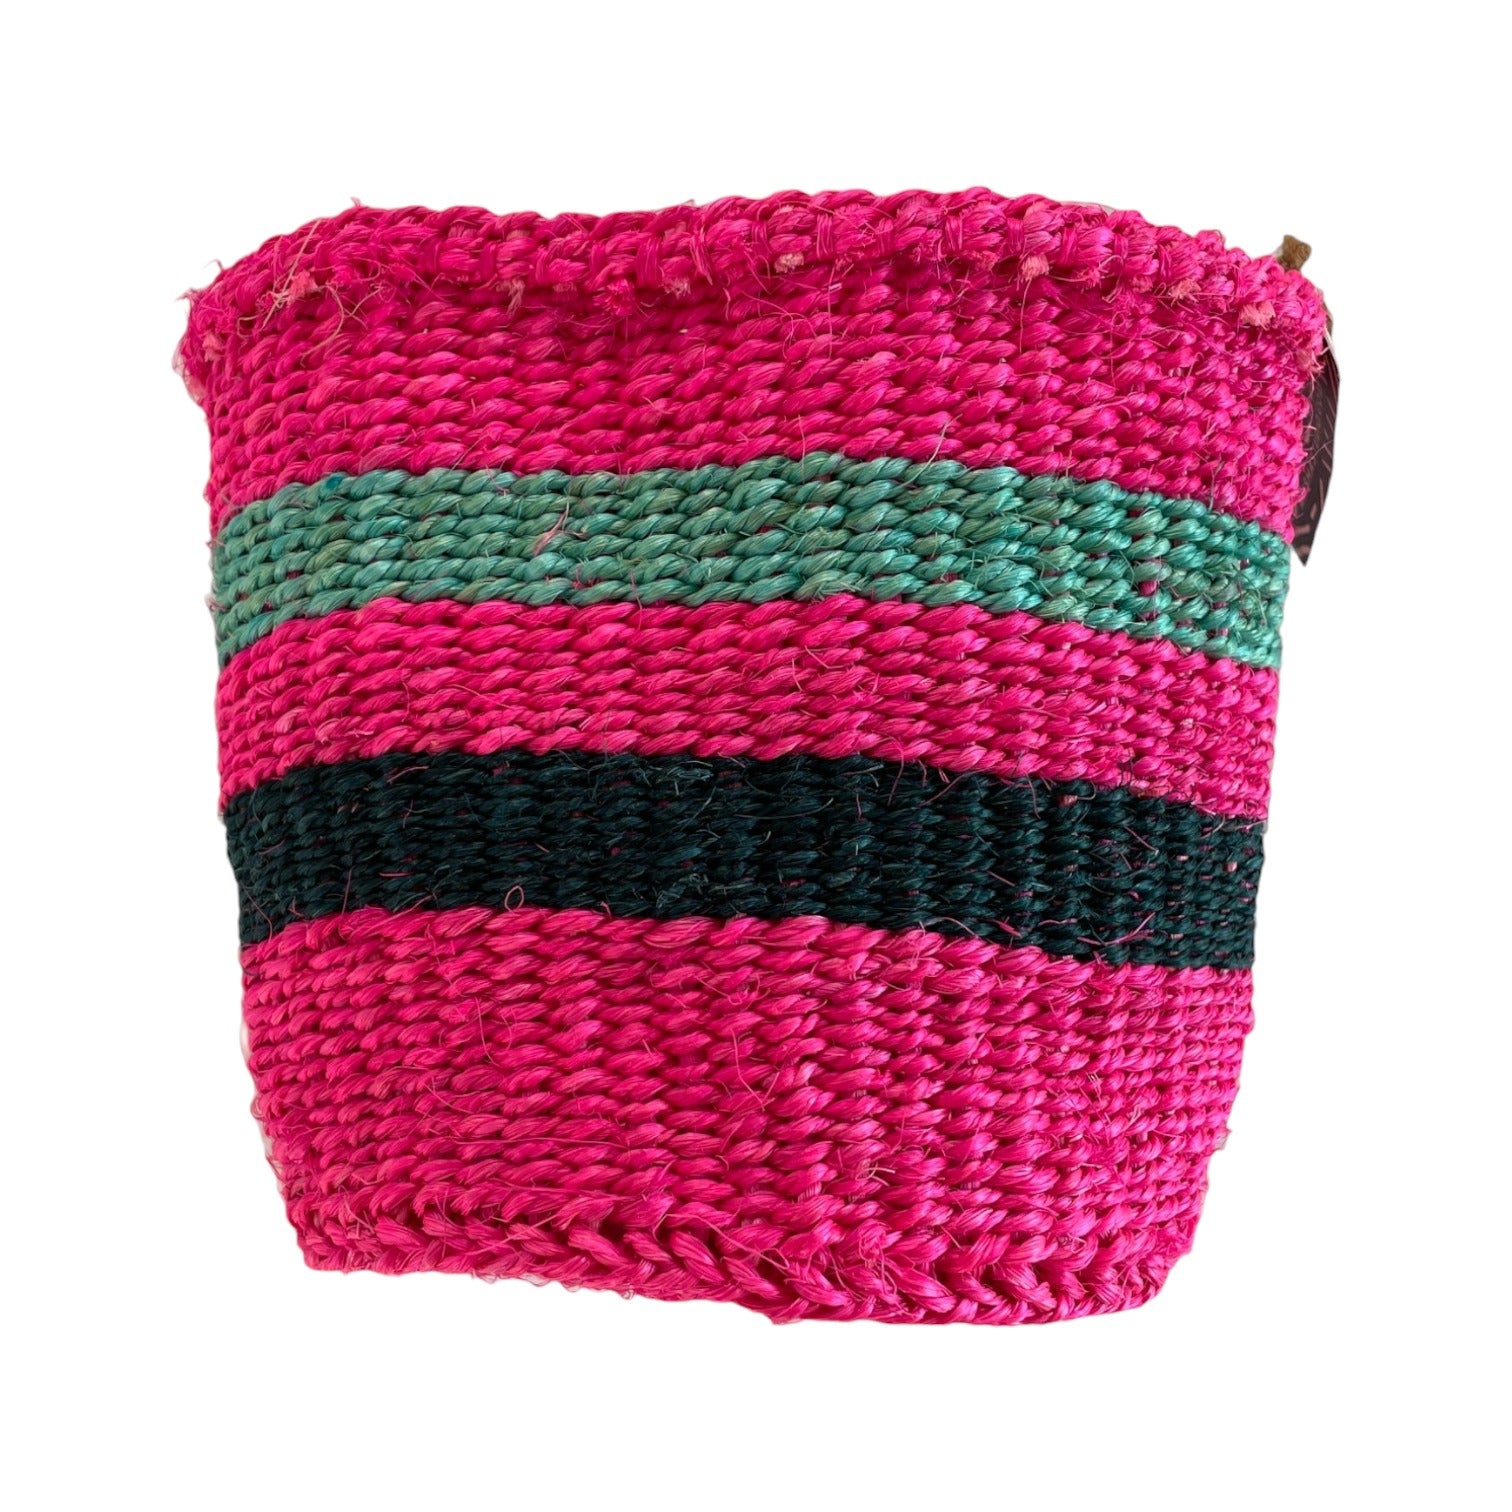 Woven jute basket in pink, teal, and dark blue